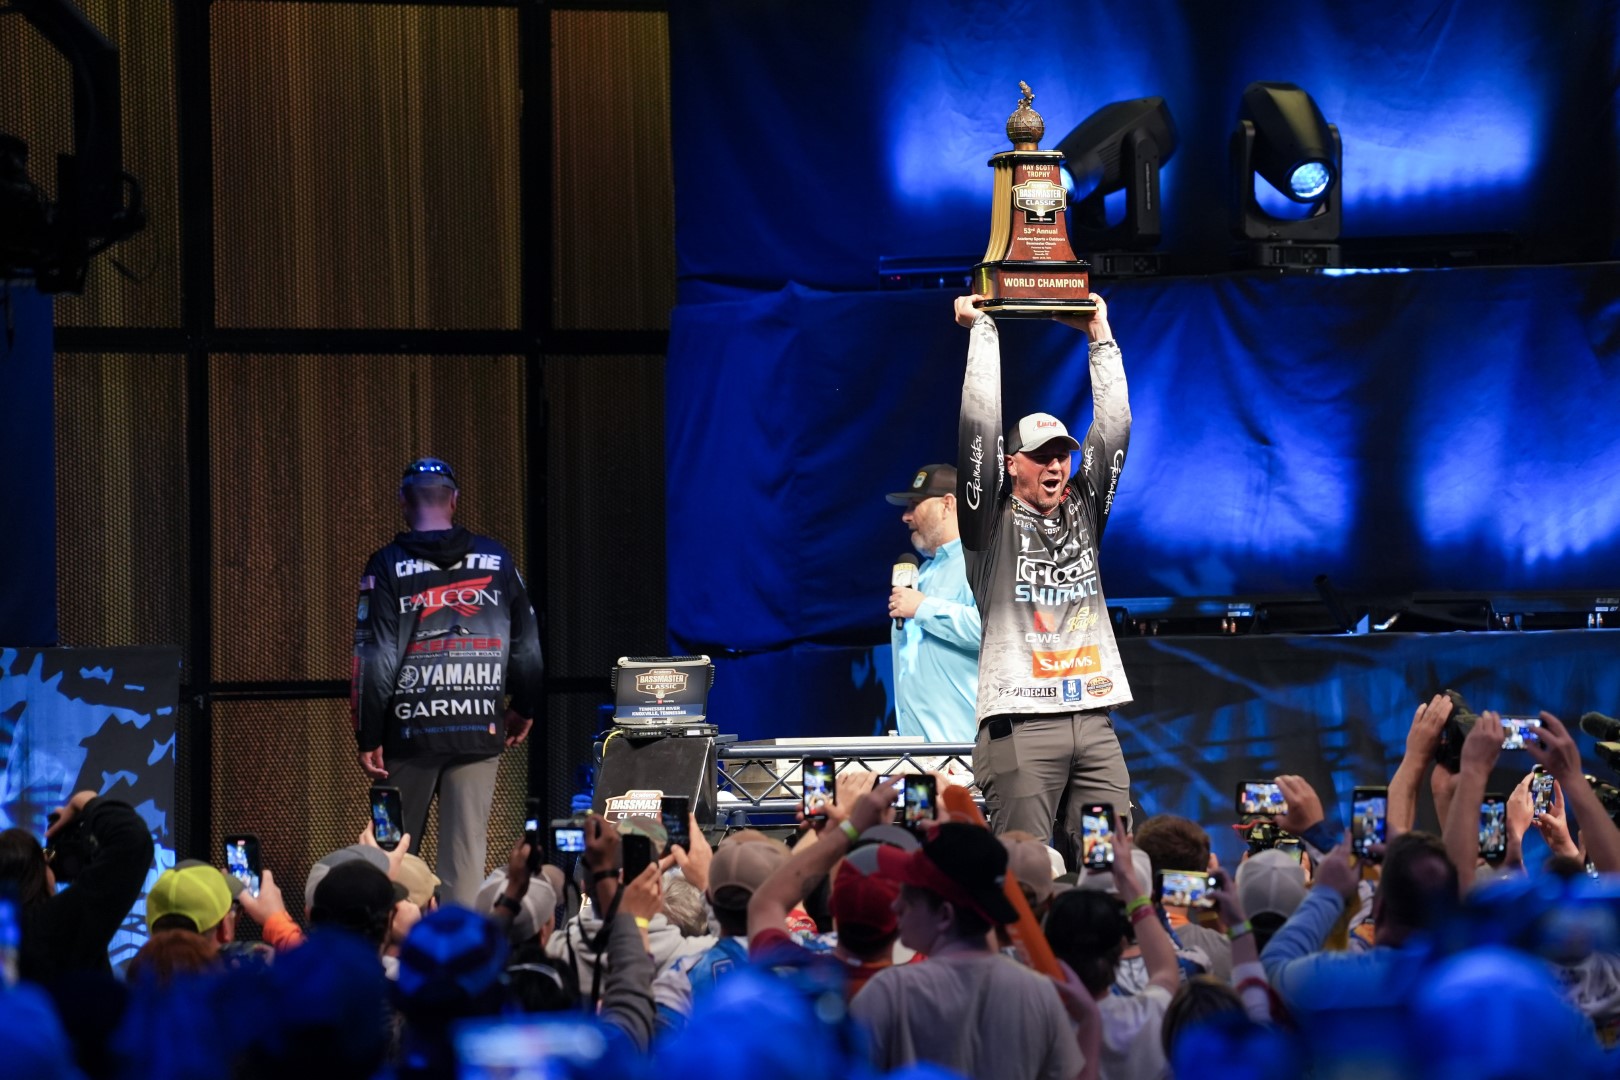 Jeff Gustafson wins 2023 Bassmaster Classic in wire-to-wire fashion